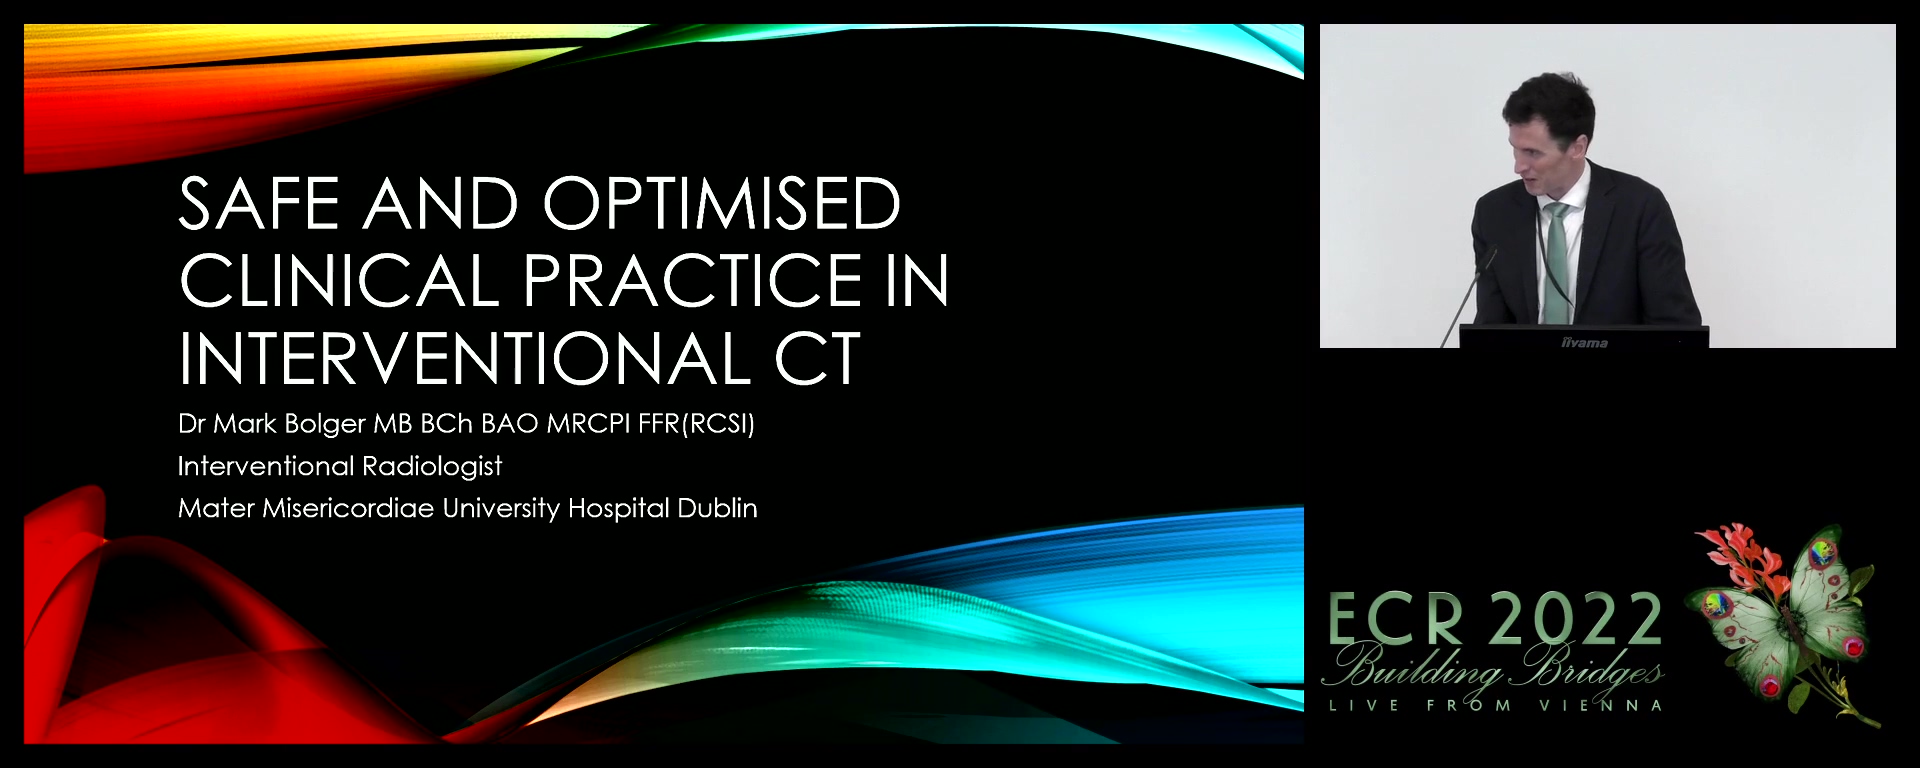 Safe and optimised clinical practice in interventional CT